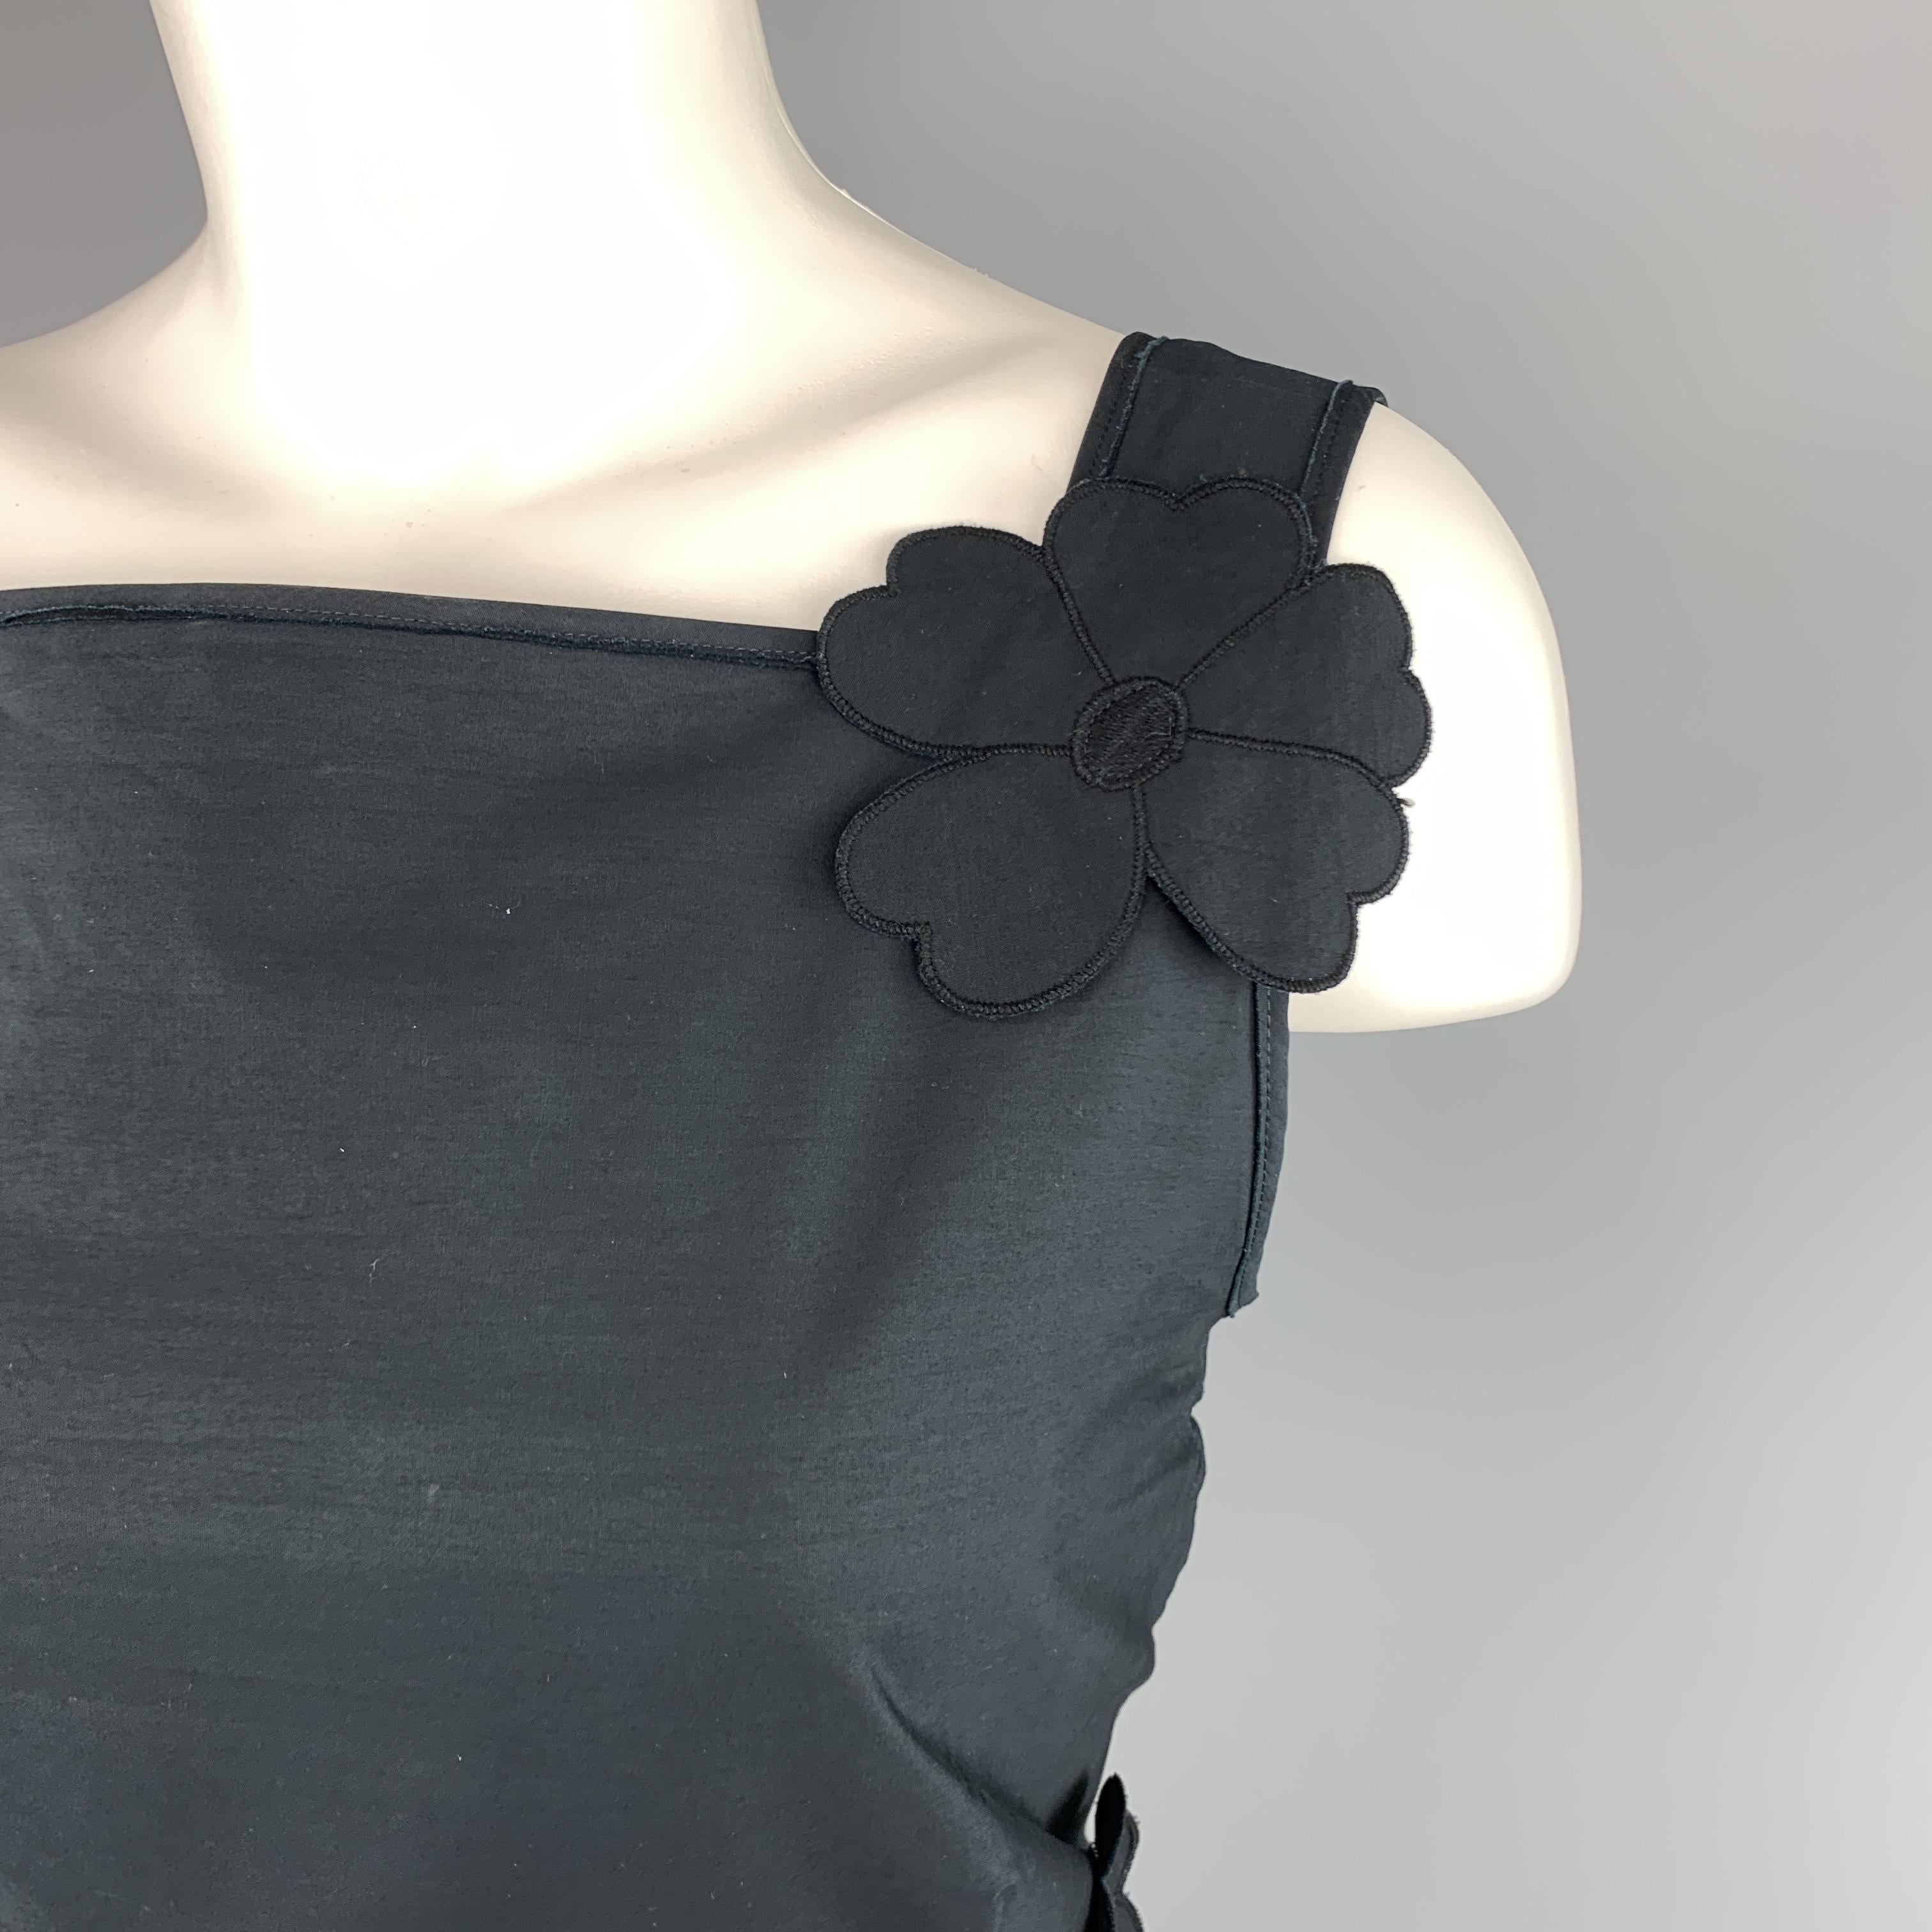 AKRIS dress top comes in navy blue cotton with a sleeveless square neckline and floral appliques.
 
Excellent Pre-Owned Condition.
Marked: 8
 
Measurements:
 
Shoulder: 15 in.
Bust: 36 in.
Length: 20.5 in.